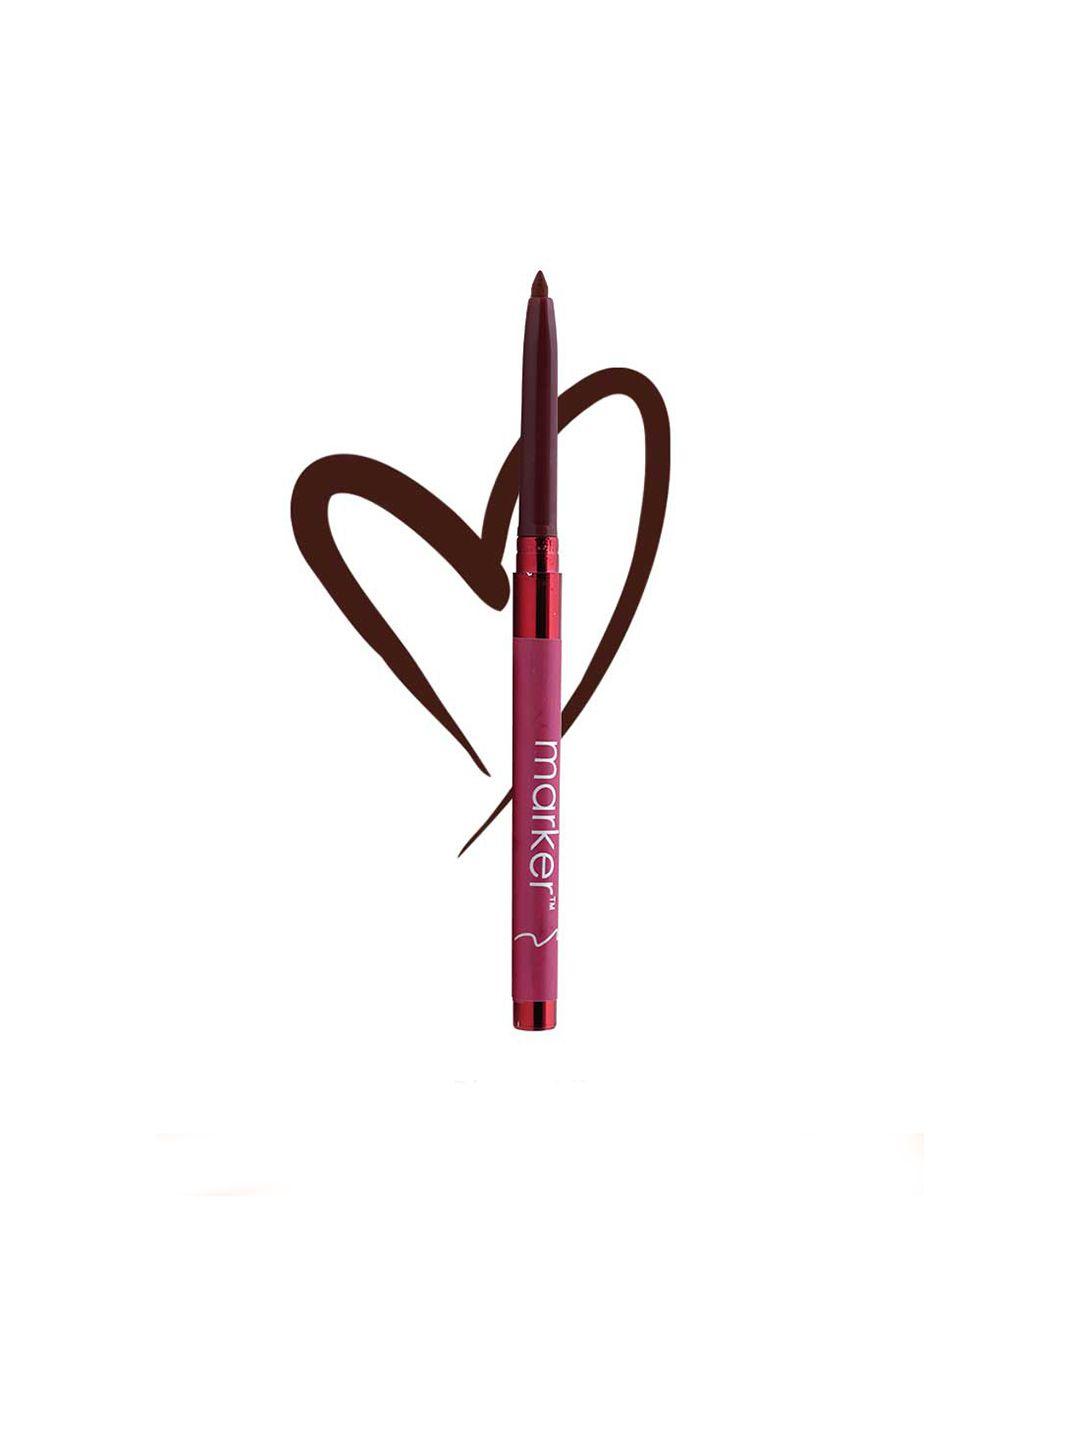 beautyrelay london outline the lips long-lasting lip liner with vitamin e 0.27g - plum alive